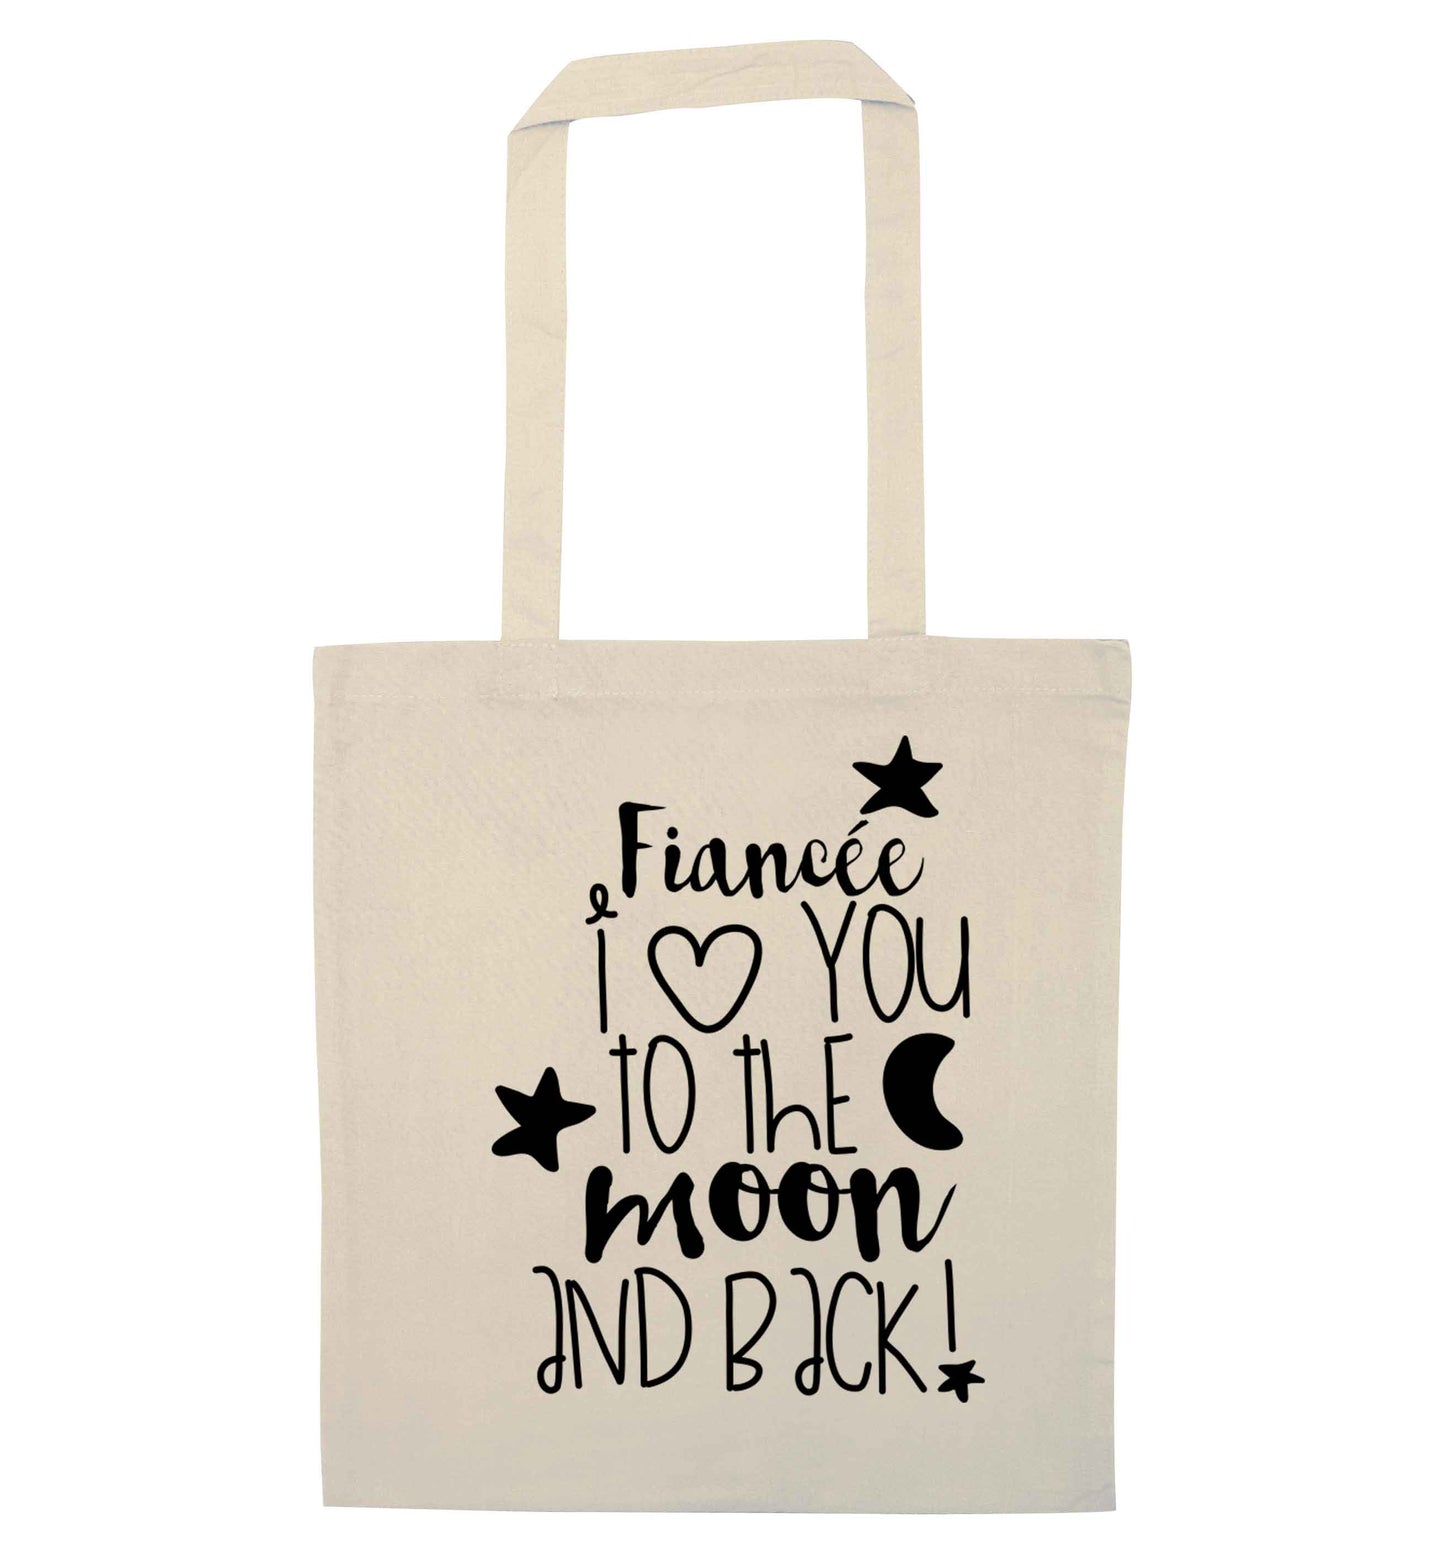 Fiancée I love you to the moon and back natural tote bag